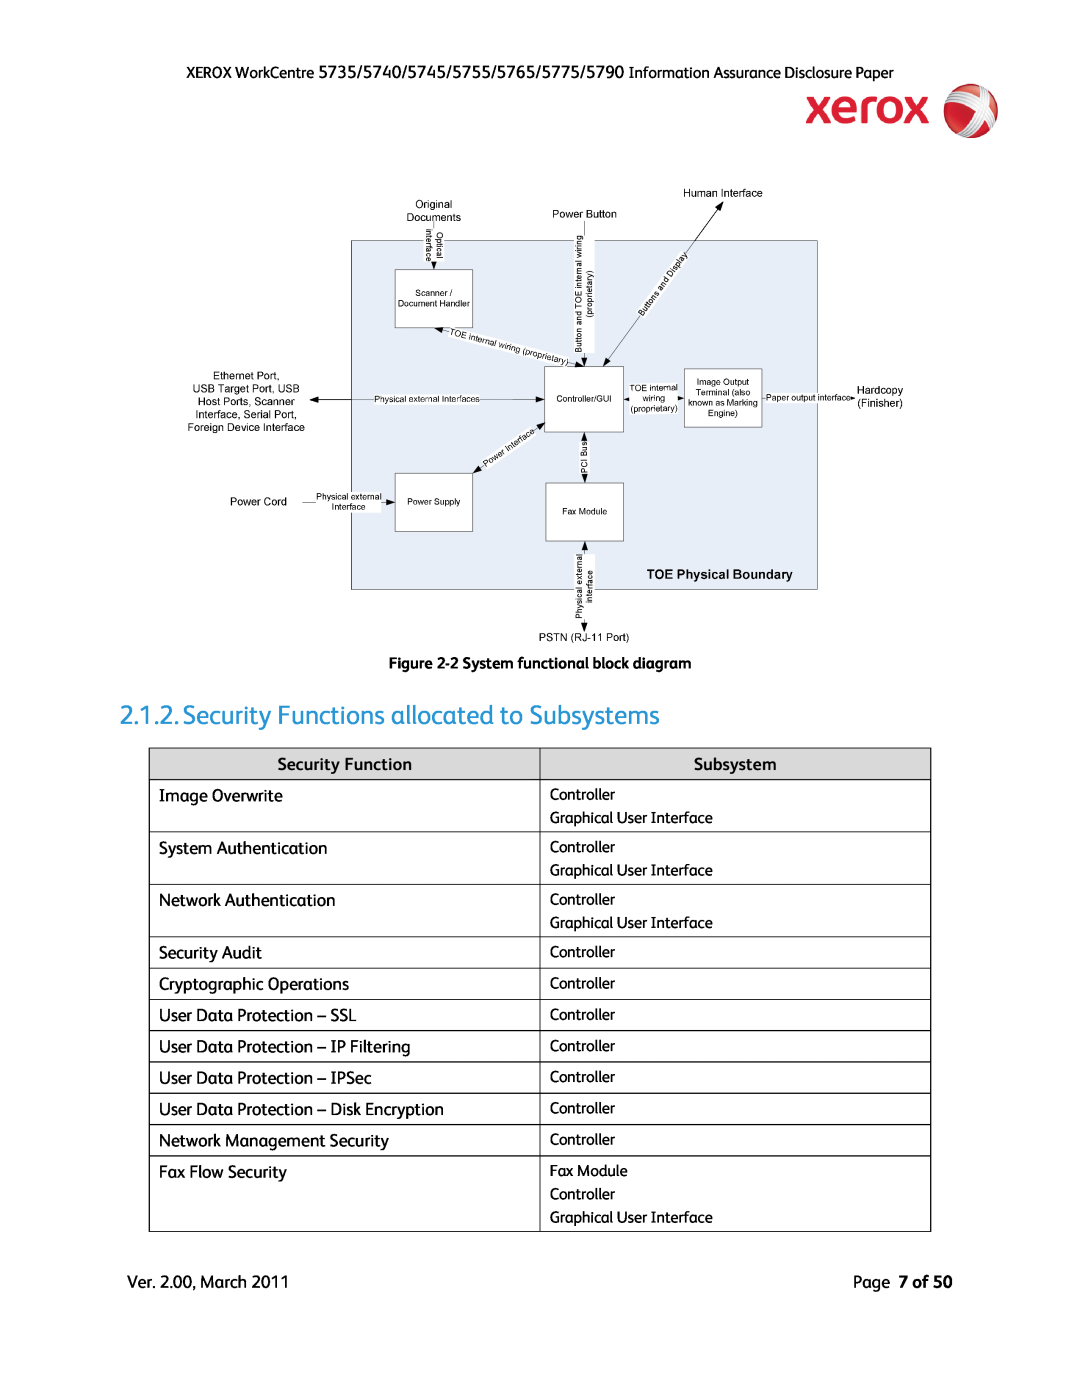 Xerox 5775, 5790, 5745, 5740, 5735, 5755 manual Security Functions allocated to Subsystems, Page 7 of 